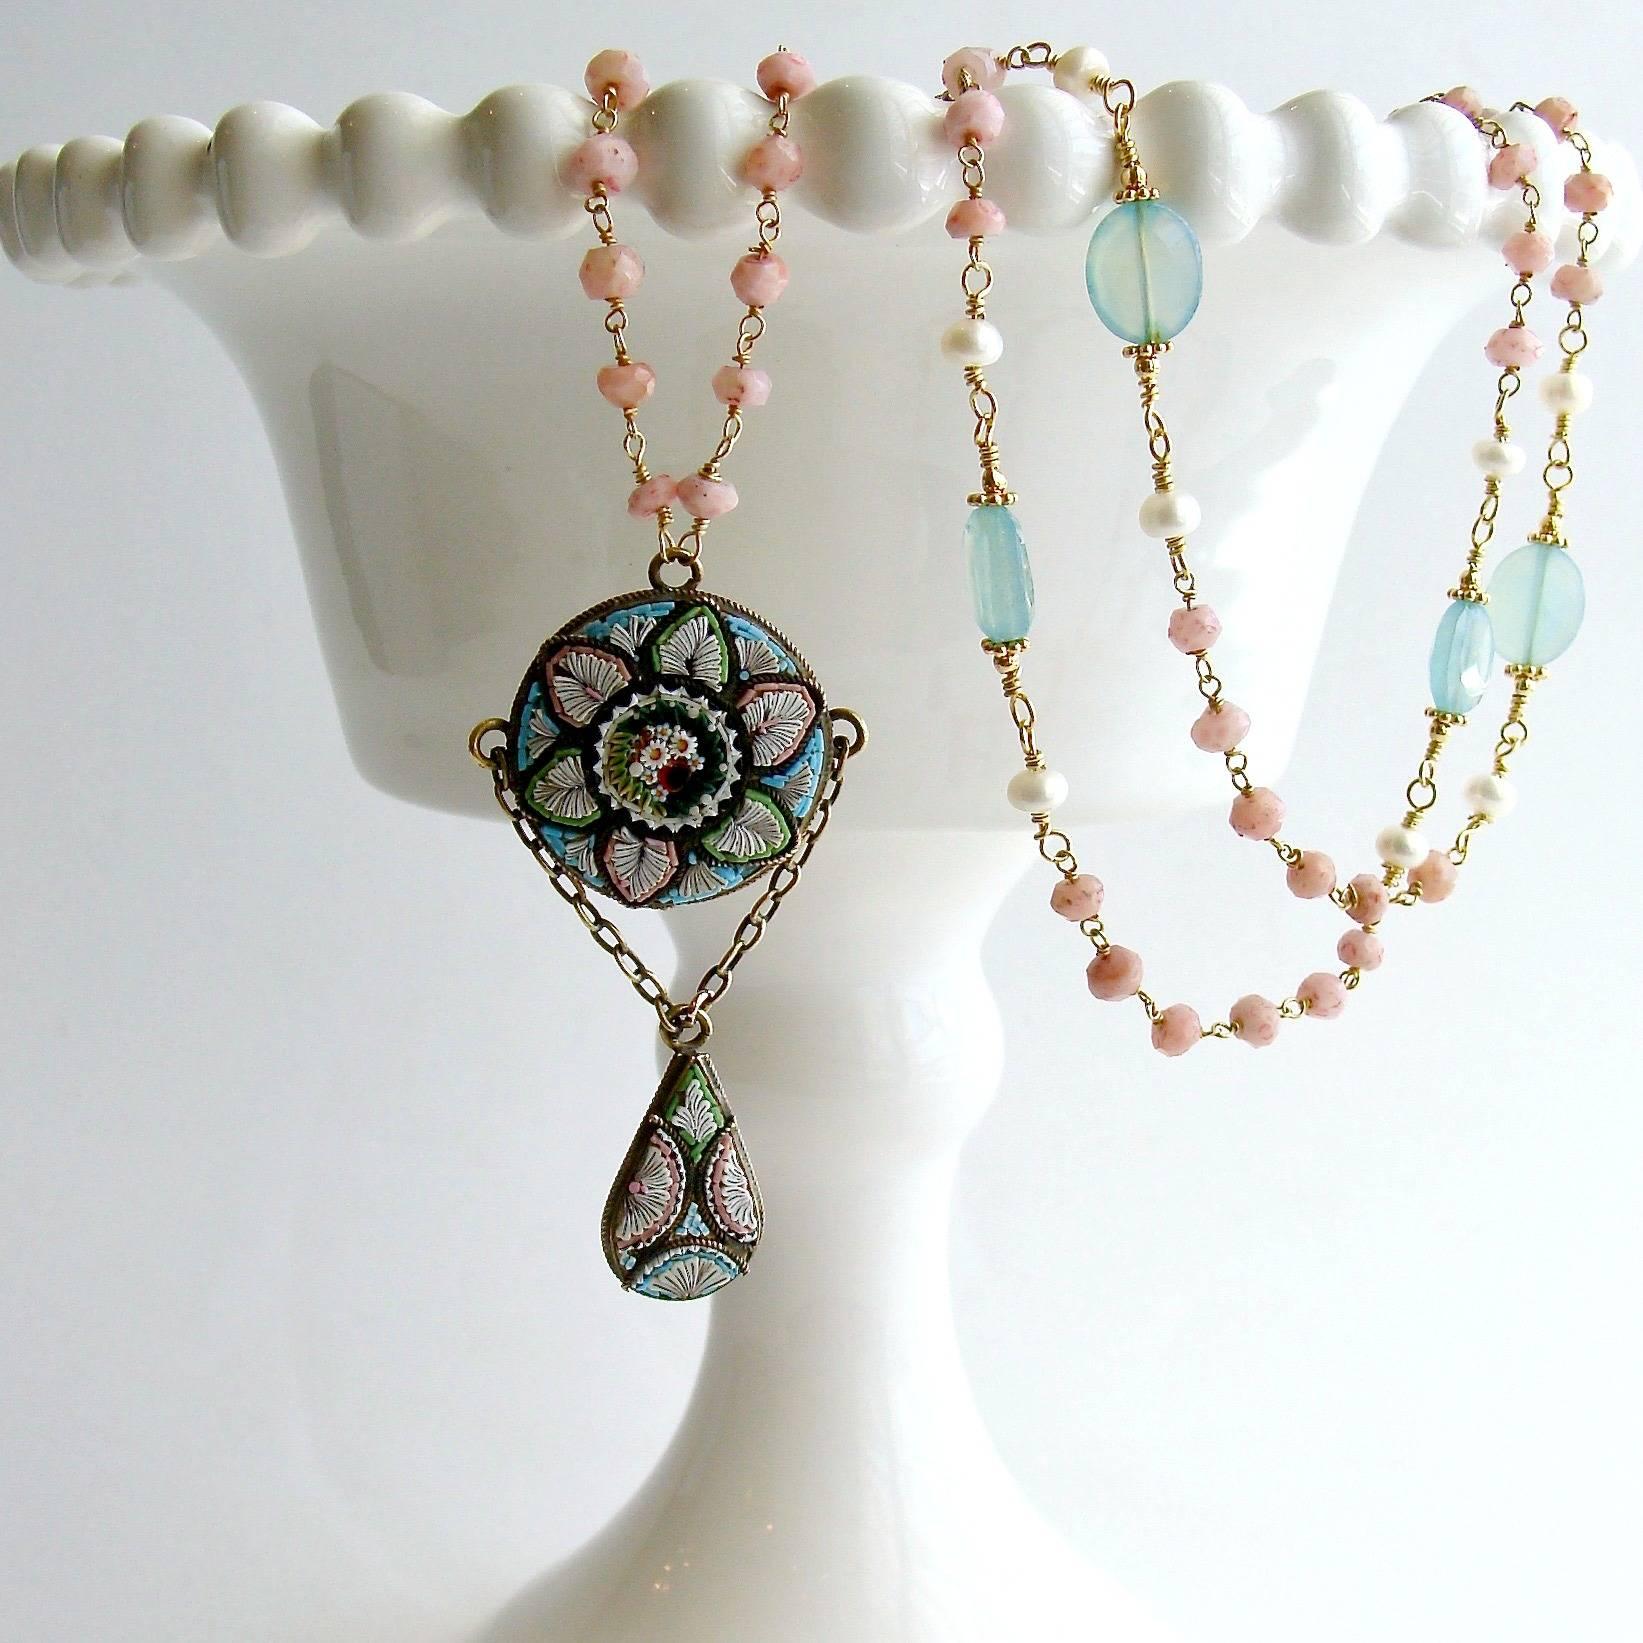 Floriana Necklace.

Delicate blush pink beads of pink Peruvian opal set a sweet and elegant  mood when paired with  stations of powdery aqua chalcedony, flanked by dimunitive button pearls.  A beautiful Victorian era micro mosaic pendant in matching